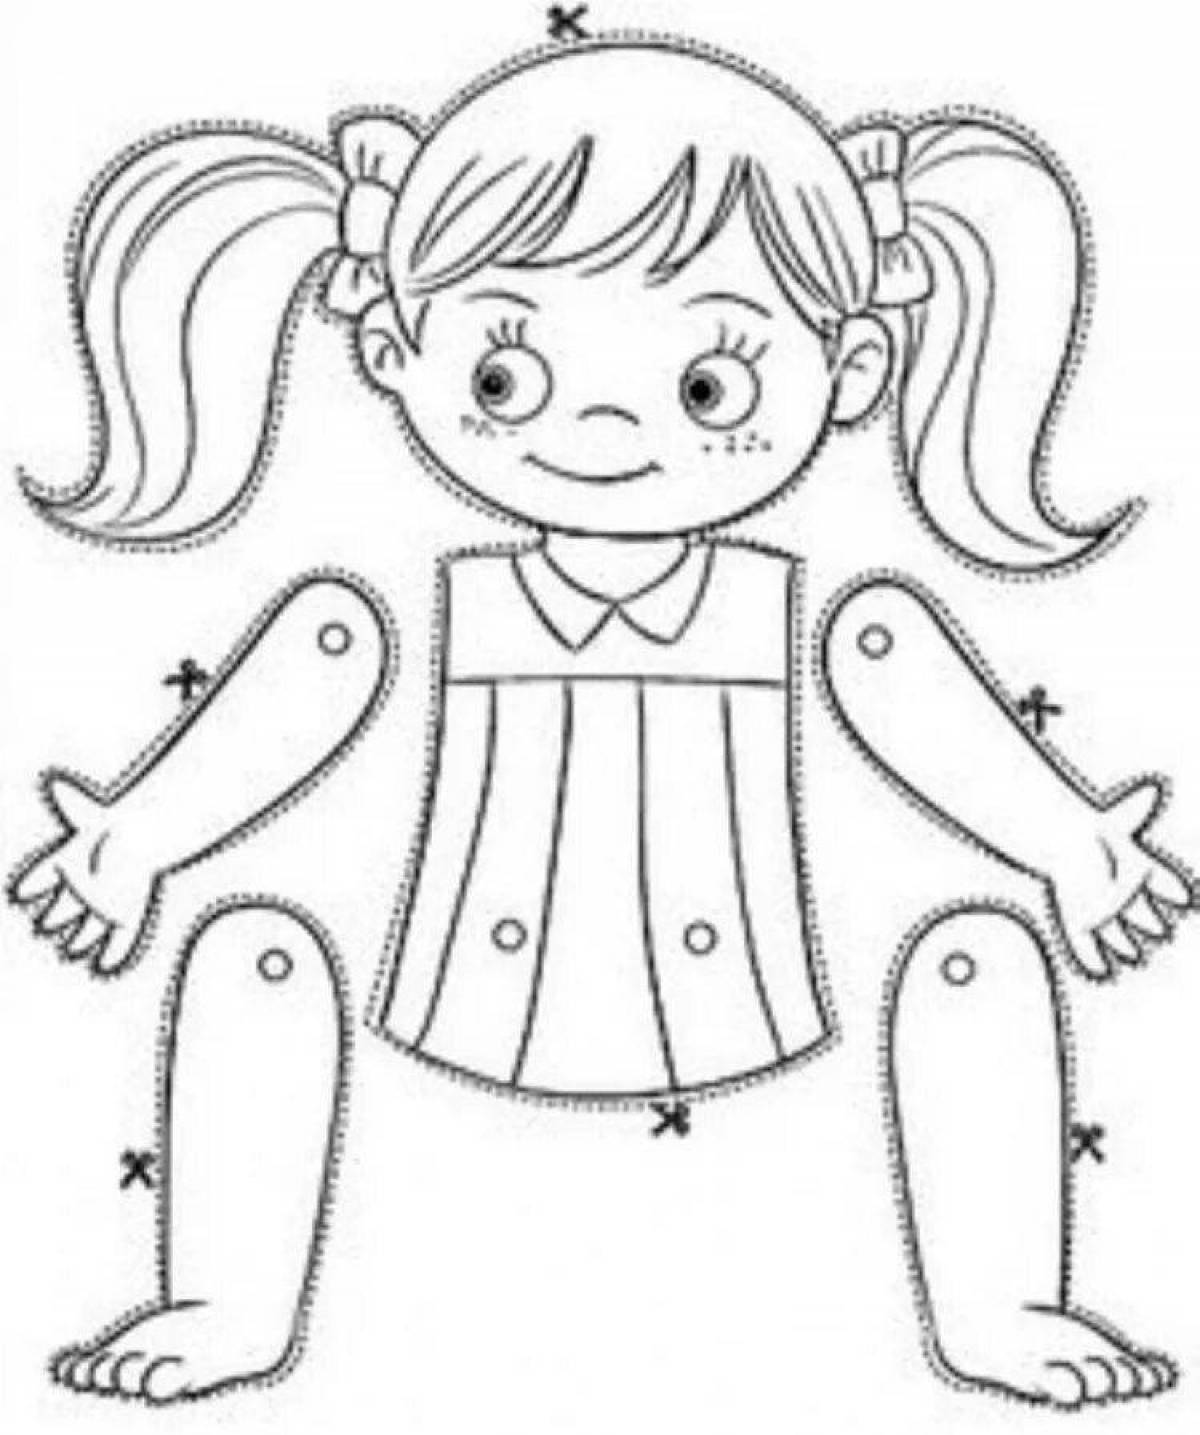 Coloring pages of human body parts for children